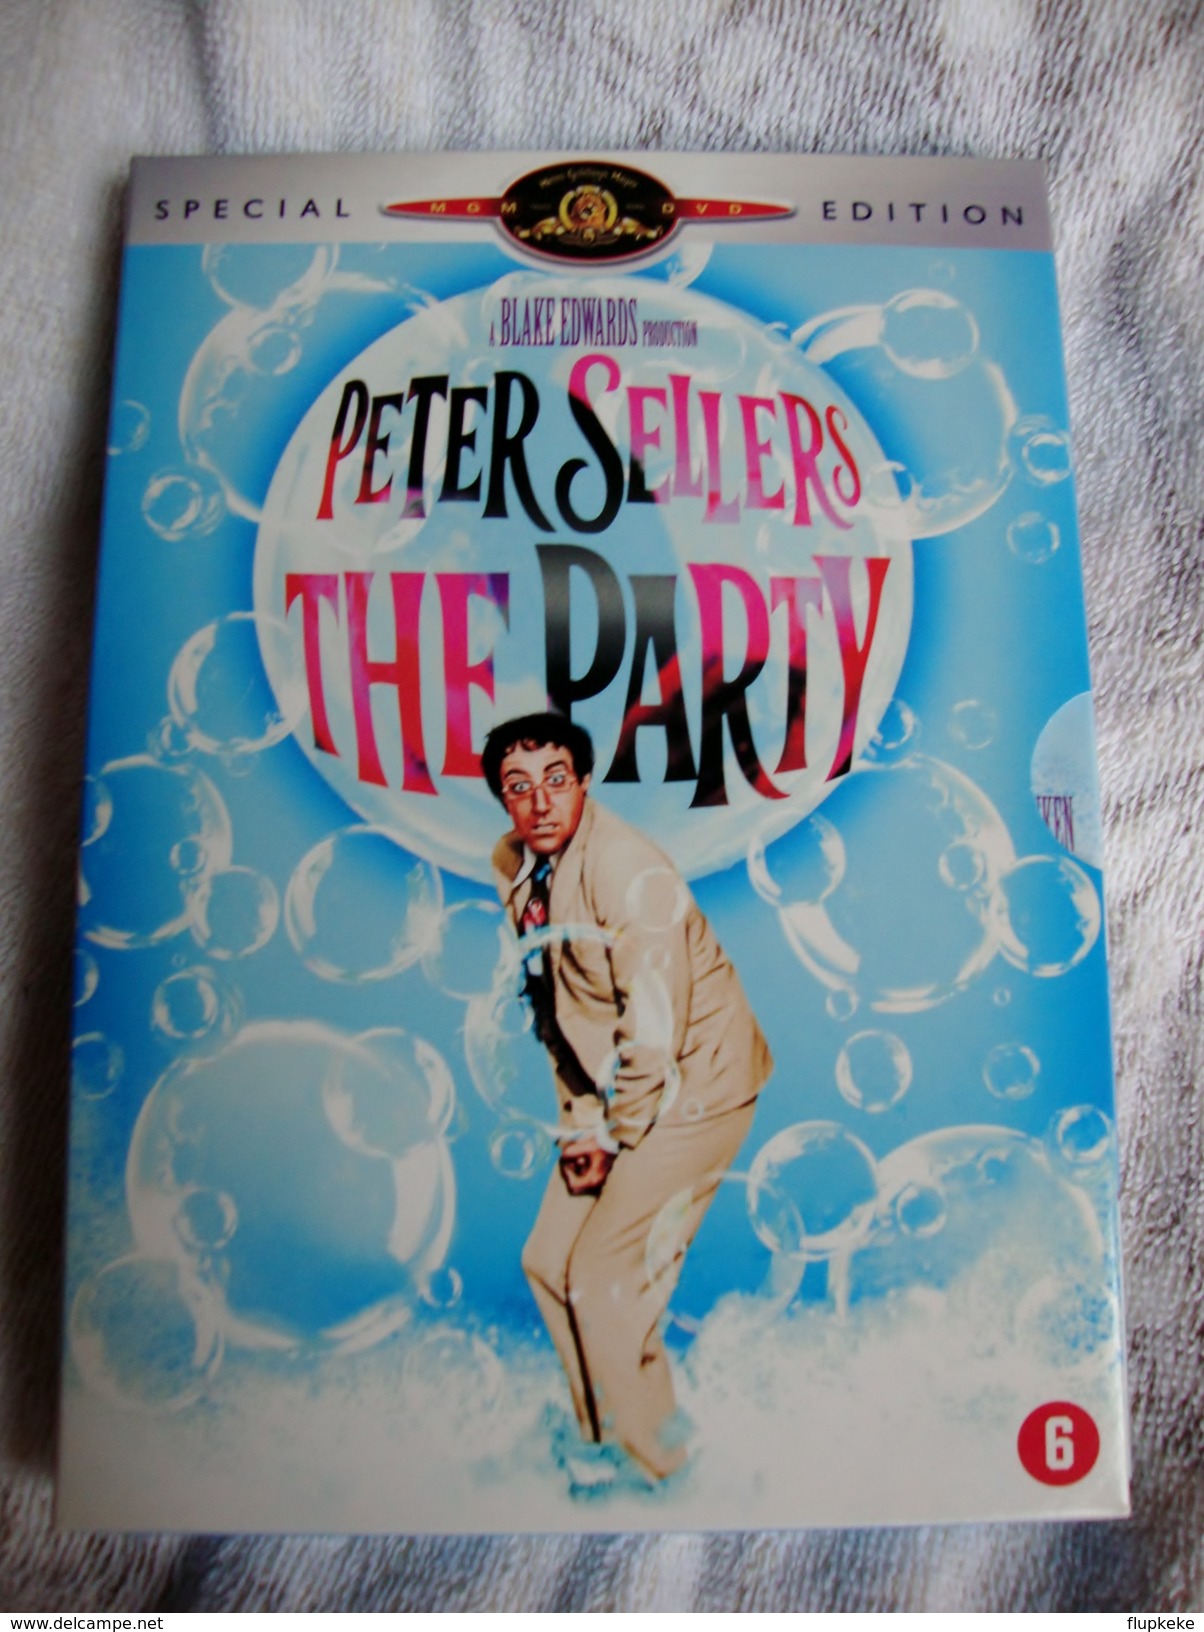 Dvd Zone 2 The Party (1968) Édition Spéciale Collector Vf+Vostfr - Comedy